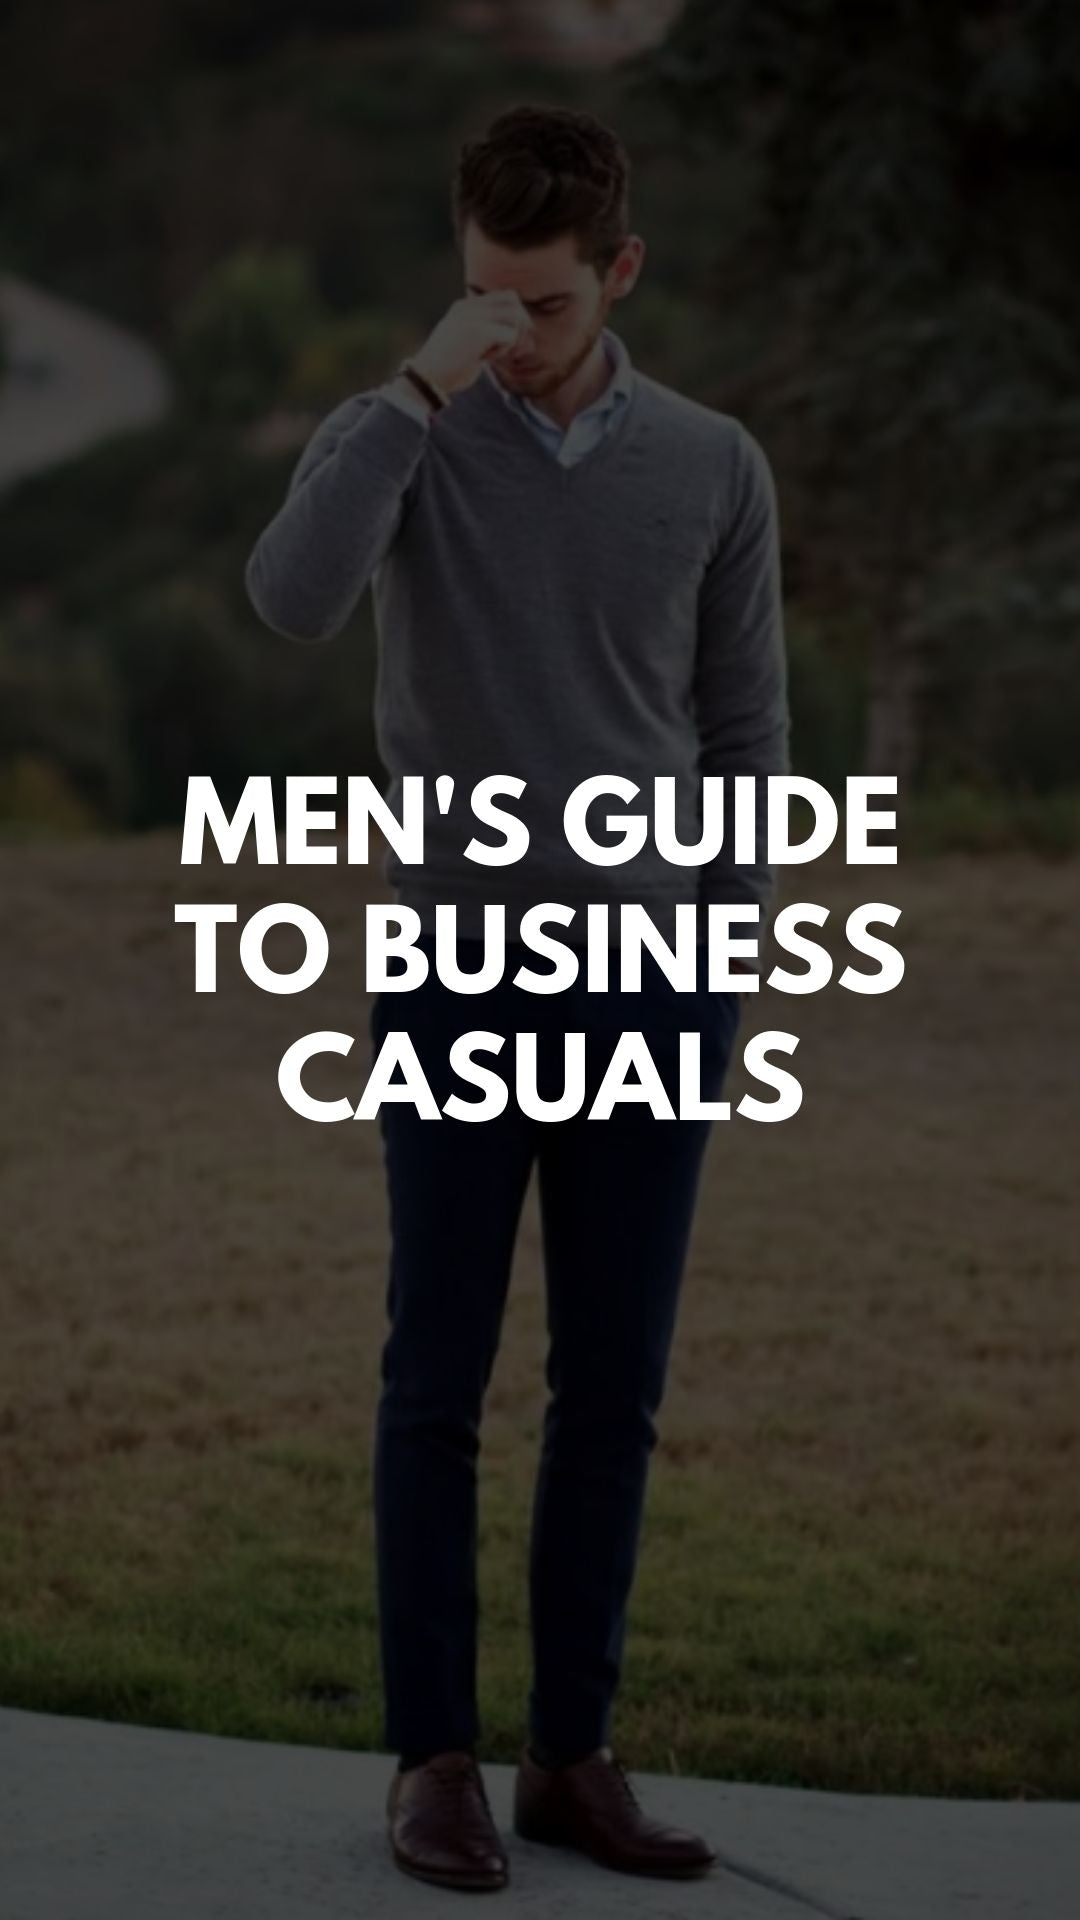 Men's Guide To Business Casuals